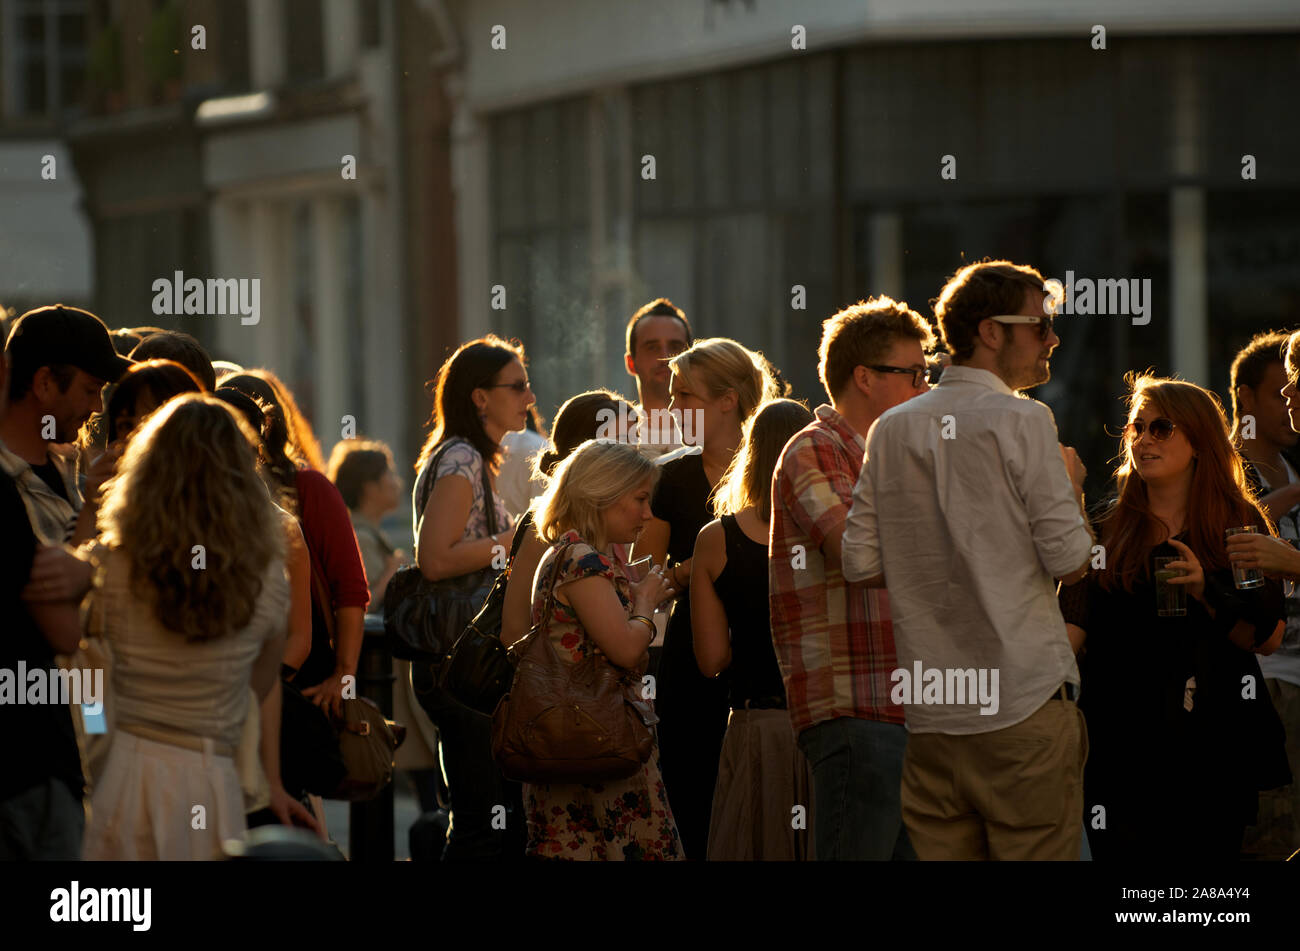 LONDON - SEPTEMBER 30, 2011: Group of young Londoners gather outside a pub in the last of the autumn afternoon sun. Stock Photo